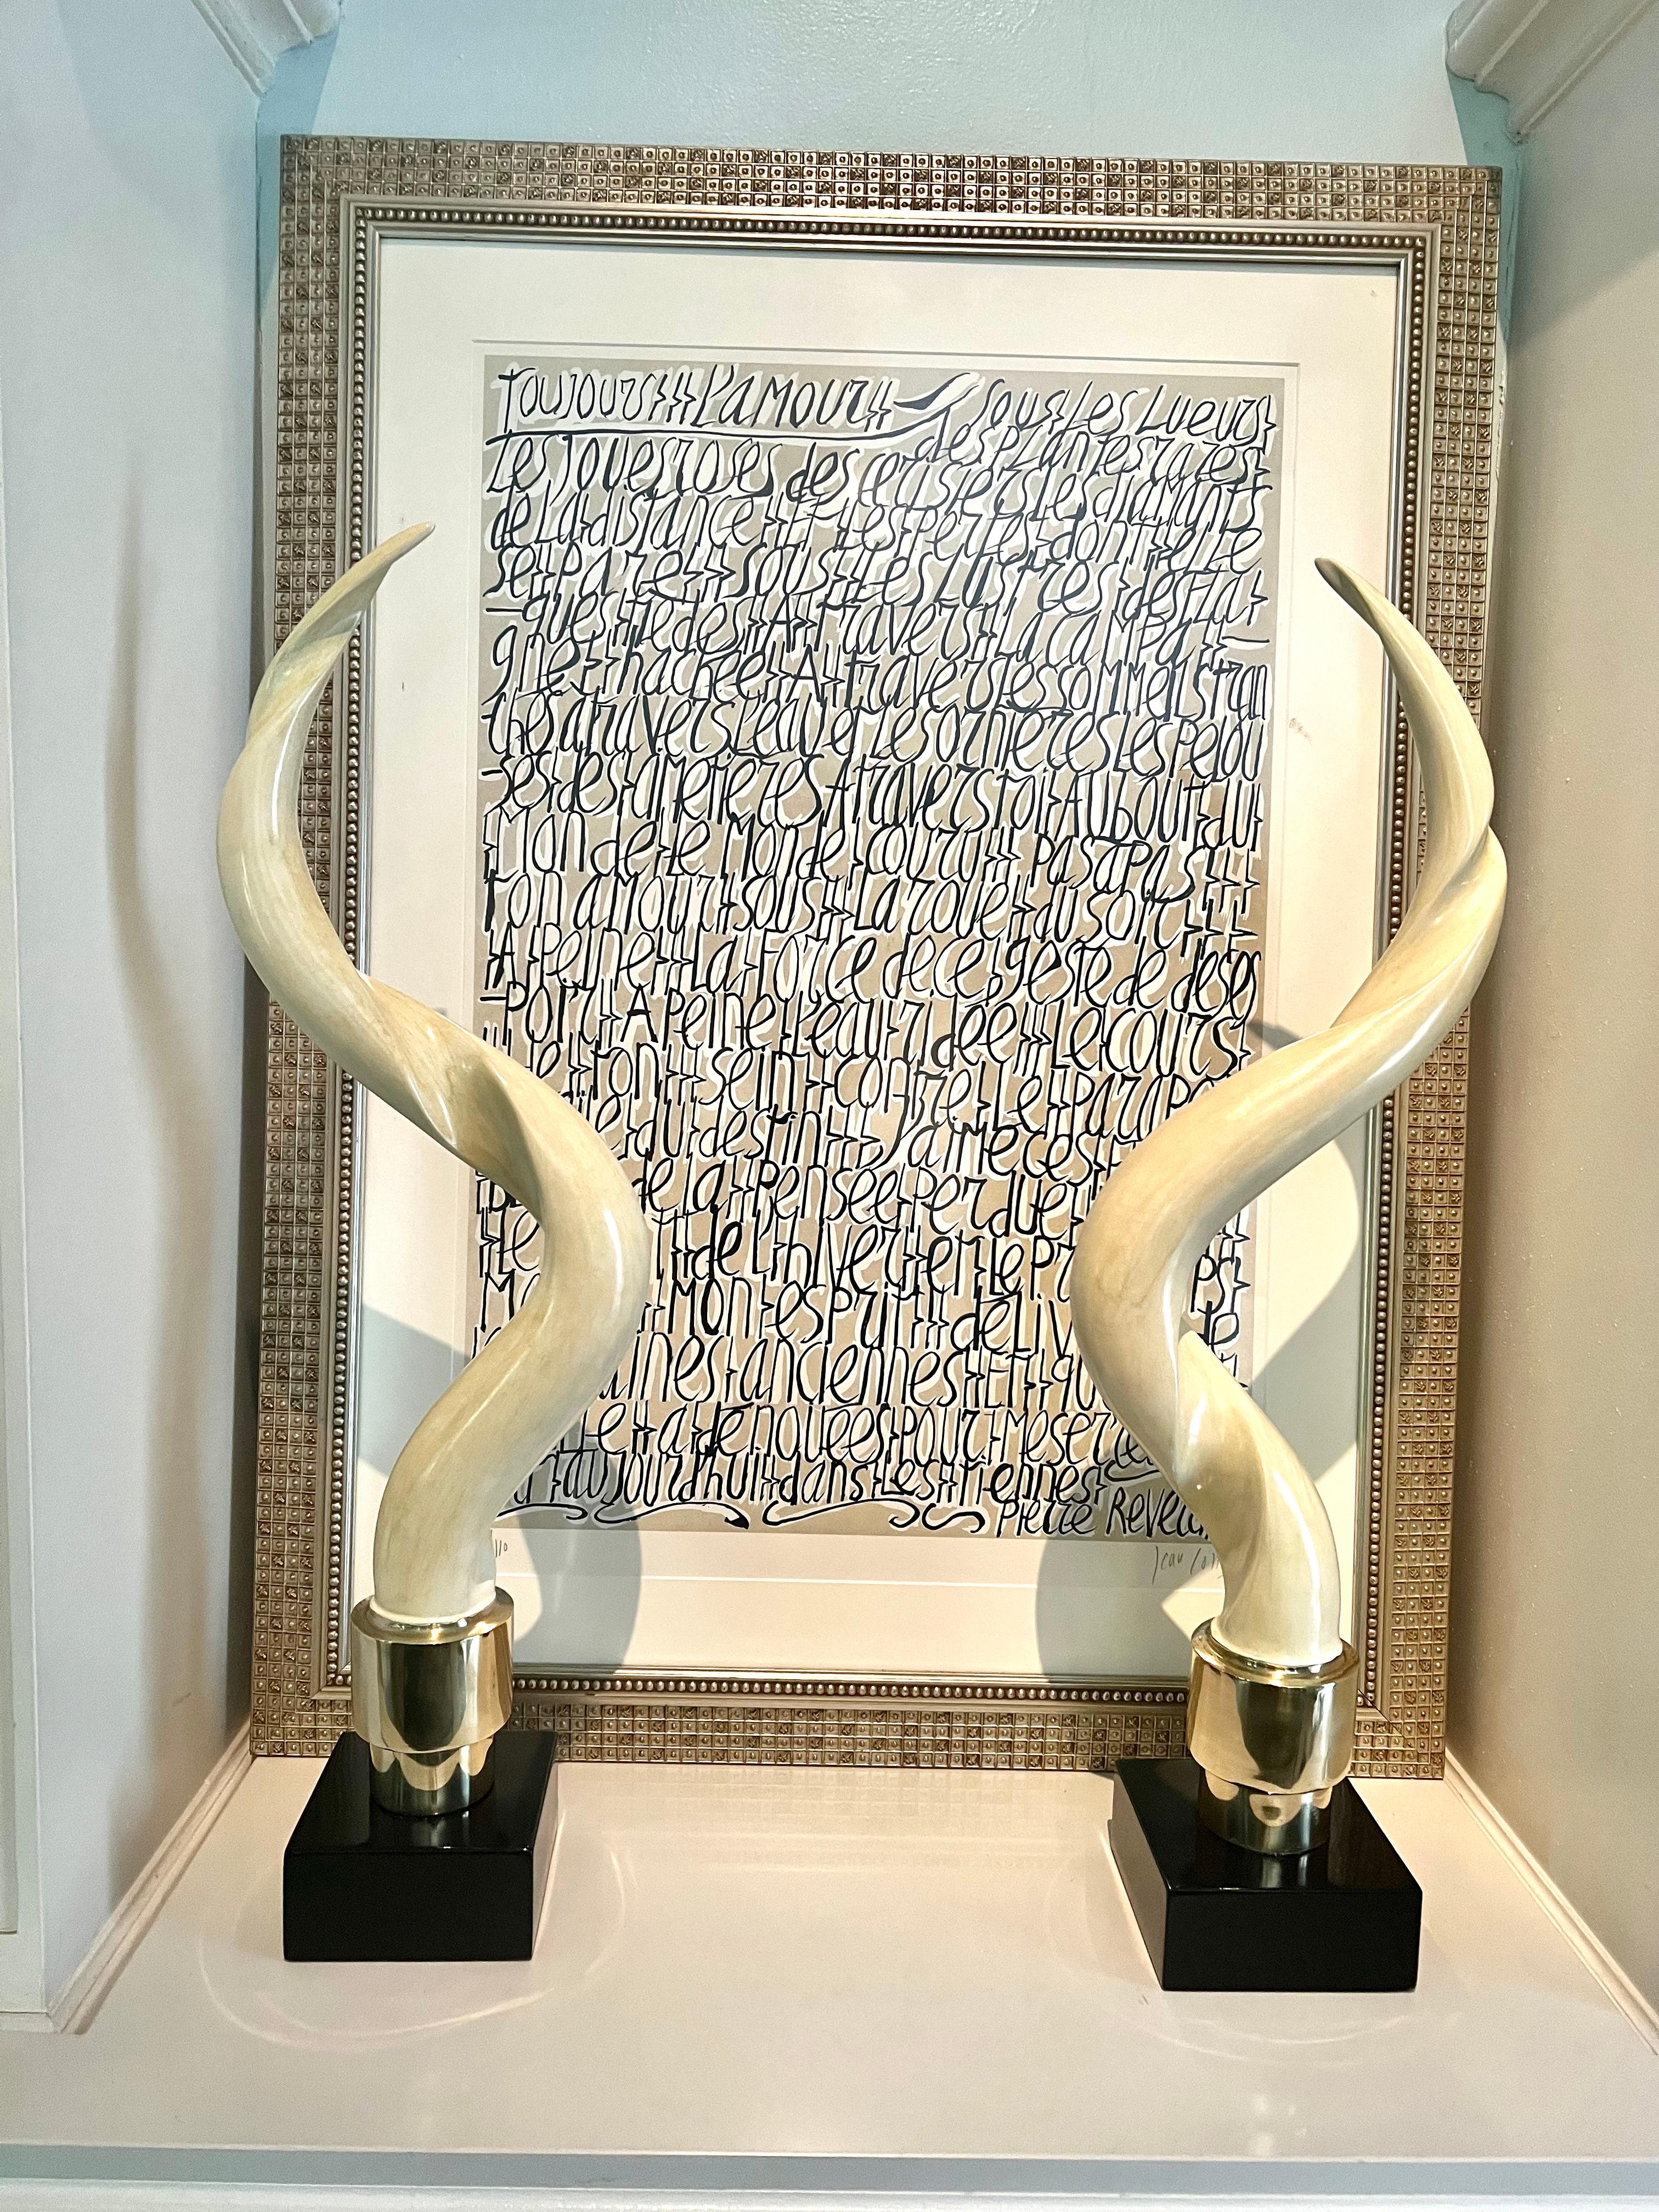 A pair of Kudu Horns on Bases.  The pair were acquired recently and we refinished the horns from Black Lacquer to a more natural faux finish... The bases are wooden black lacquer with an addition to the base which is polished brass. 

The pair would